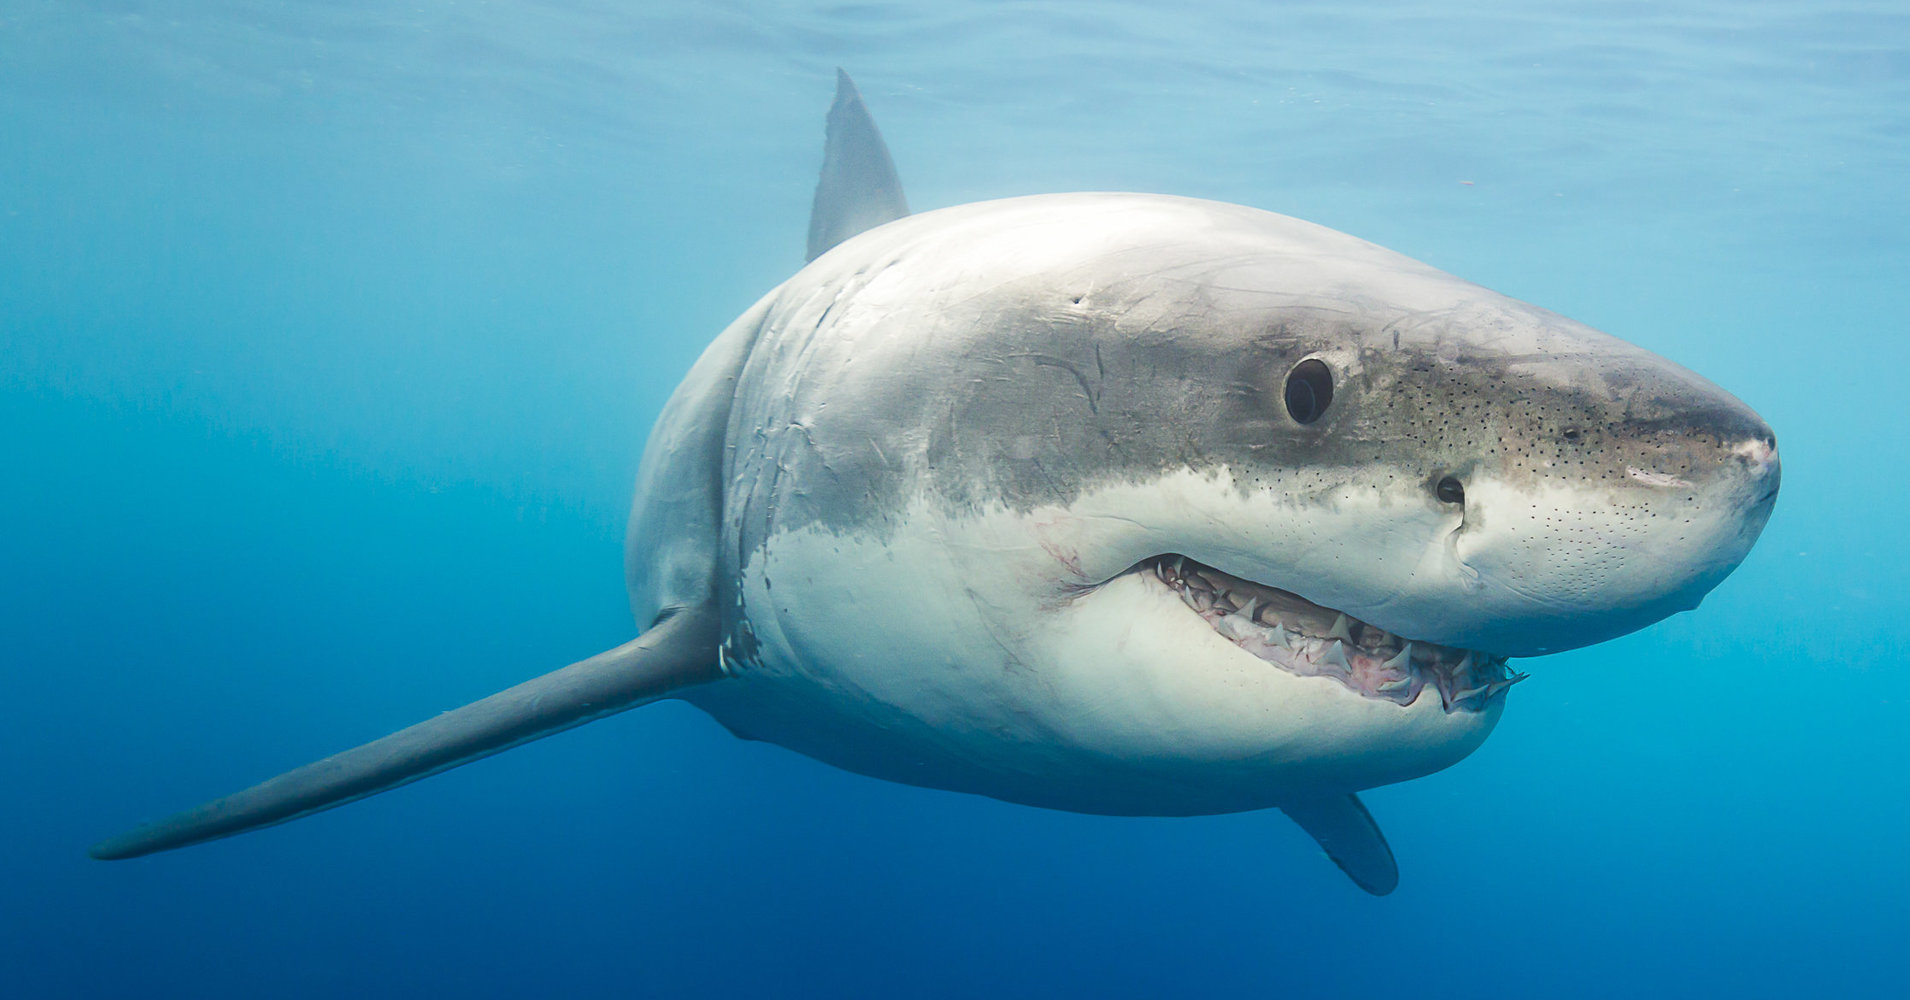 *** EXCLUSIVE *** GUADALUPE ISLAND, MEXICO - SEPTEMBER 8: A great white shark photographed on September, 8, 2015 near Guadalupe Island, Mexico. Great white sharks emerge from the water with their jaws open in the clear blue waters of the Pacific Ocean. The incredible animals were photographed off the the coast of Guadalupe Island- a small volcanic island roughly 150 miles off the coast of Mexico's Baja California peninsula. There is thought to be roughly 170 great white's near the island- making it one of the best places in the world for divers to spot them. PHOTOGRAPH BY David Fleetham / Barcroft India UK Office, London. T +44 845 370 2233 W www.barcroftmedia.com USA Office, New York City. T +1 212 796 2458 W www.barcroftusa.com Indian Office, Delhi. T +91 11 4053 2429 W www.barcroftindia.com (Photo credit should read David Fleetham / Barcroft India / Barcroft Media via Getty Images)